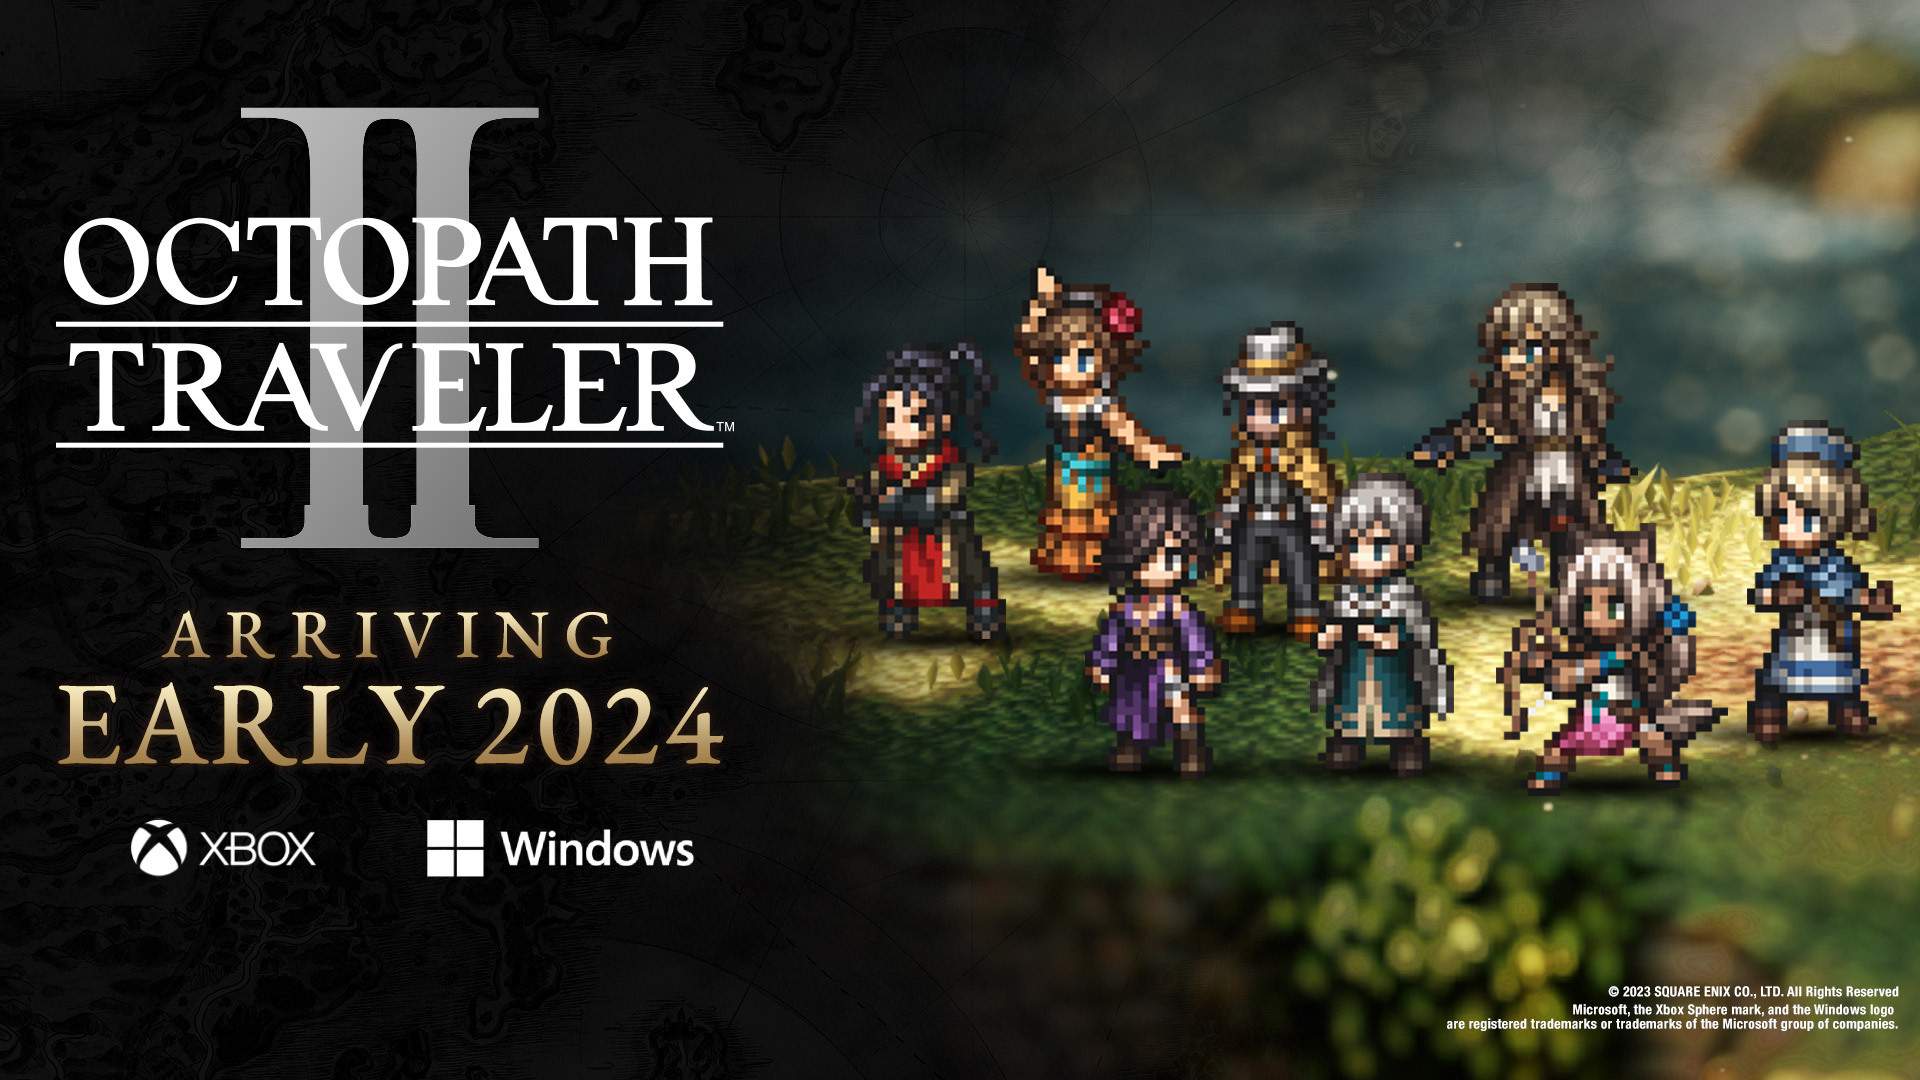 Octopath Traveler 2 Logo and game characters. Coming early 2024 messaging with Xbox and Windows logo